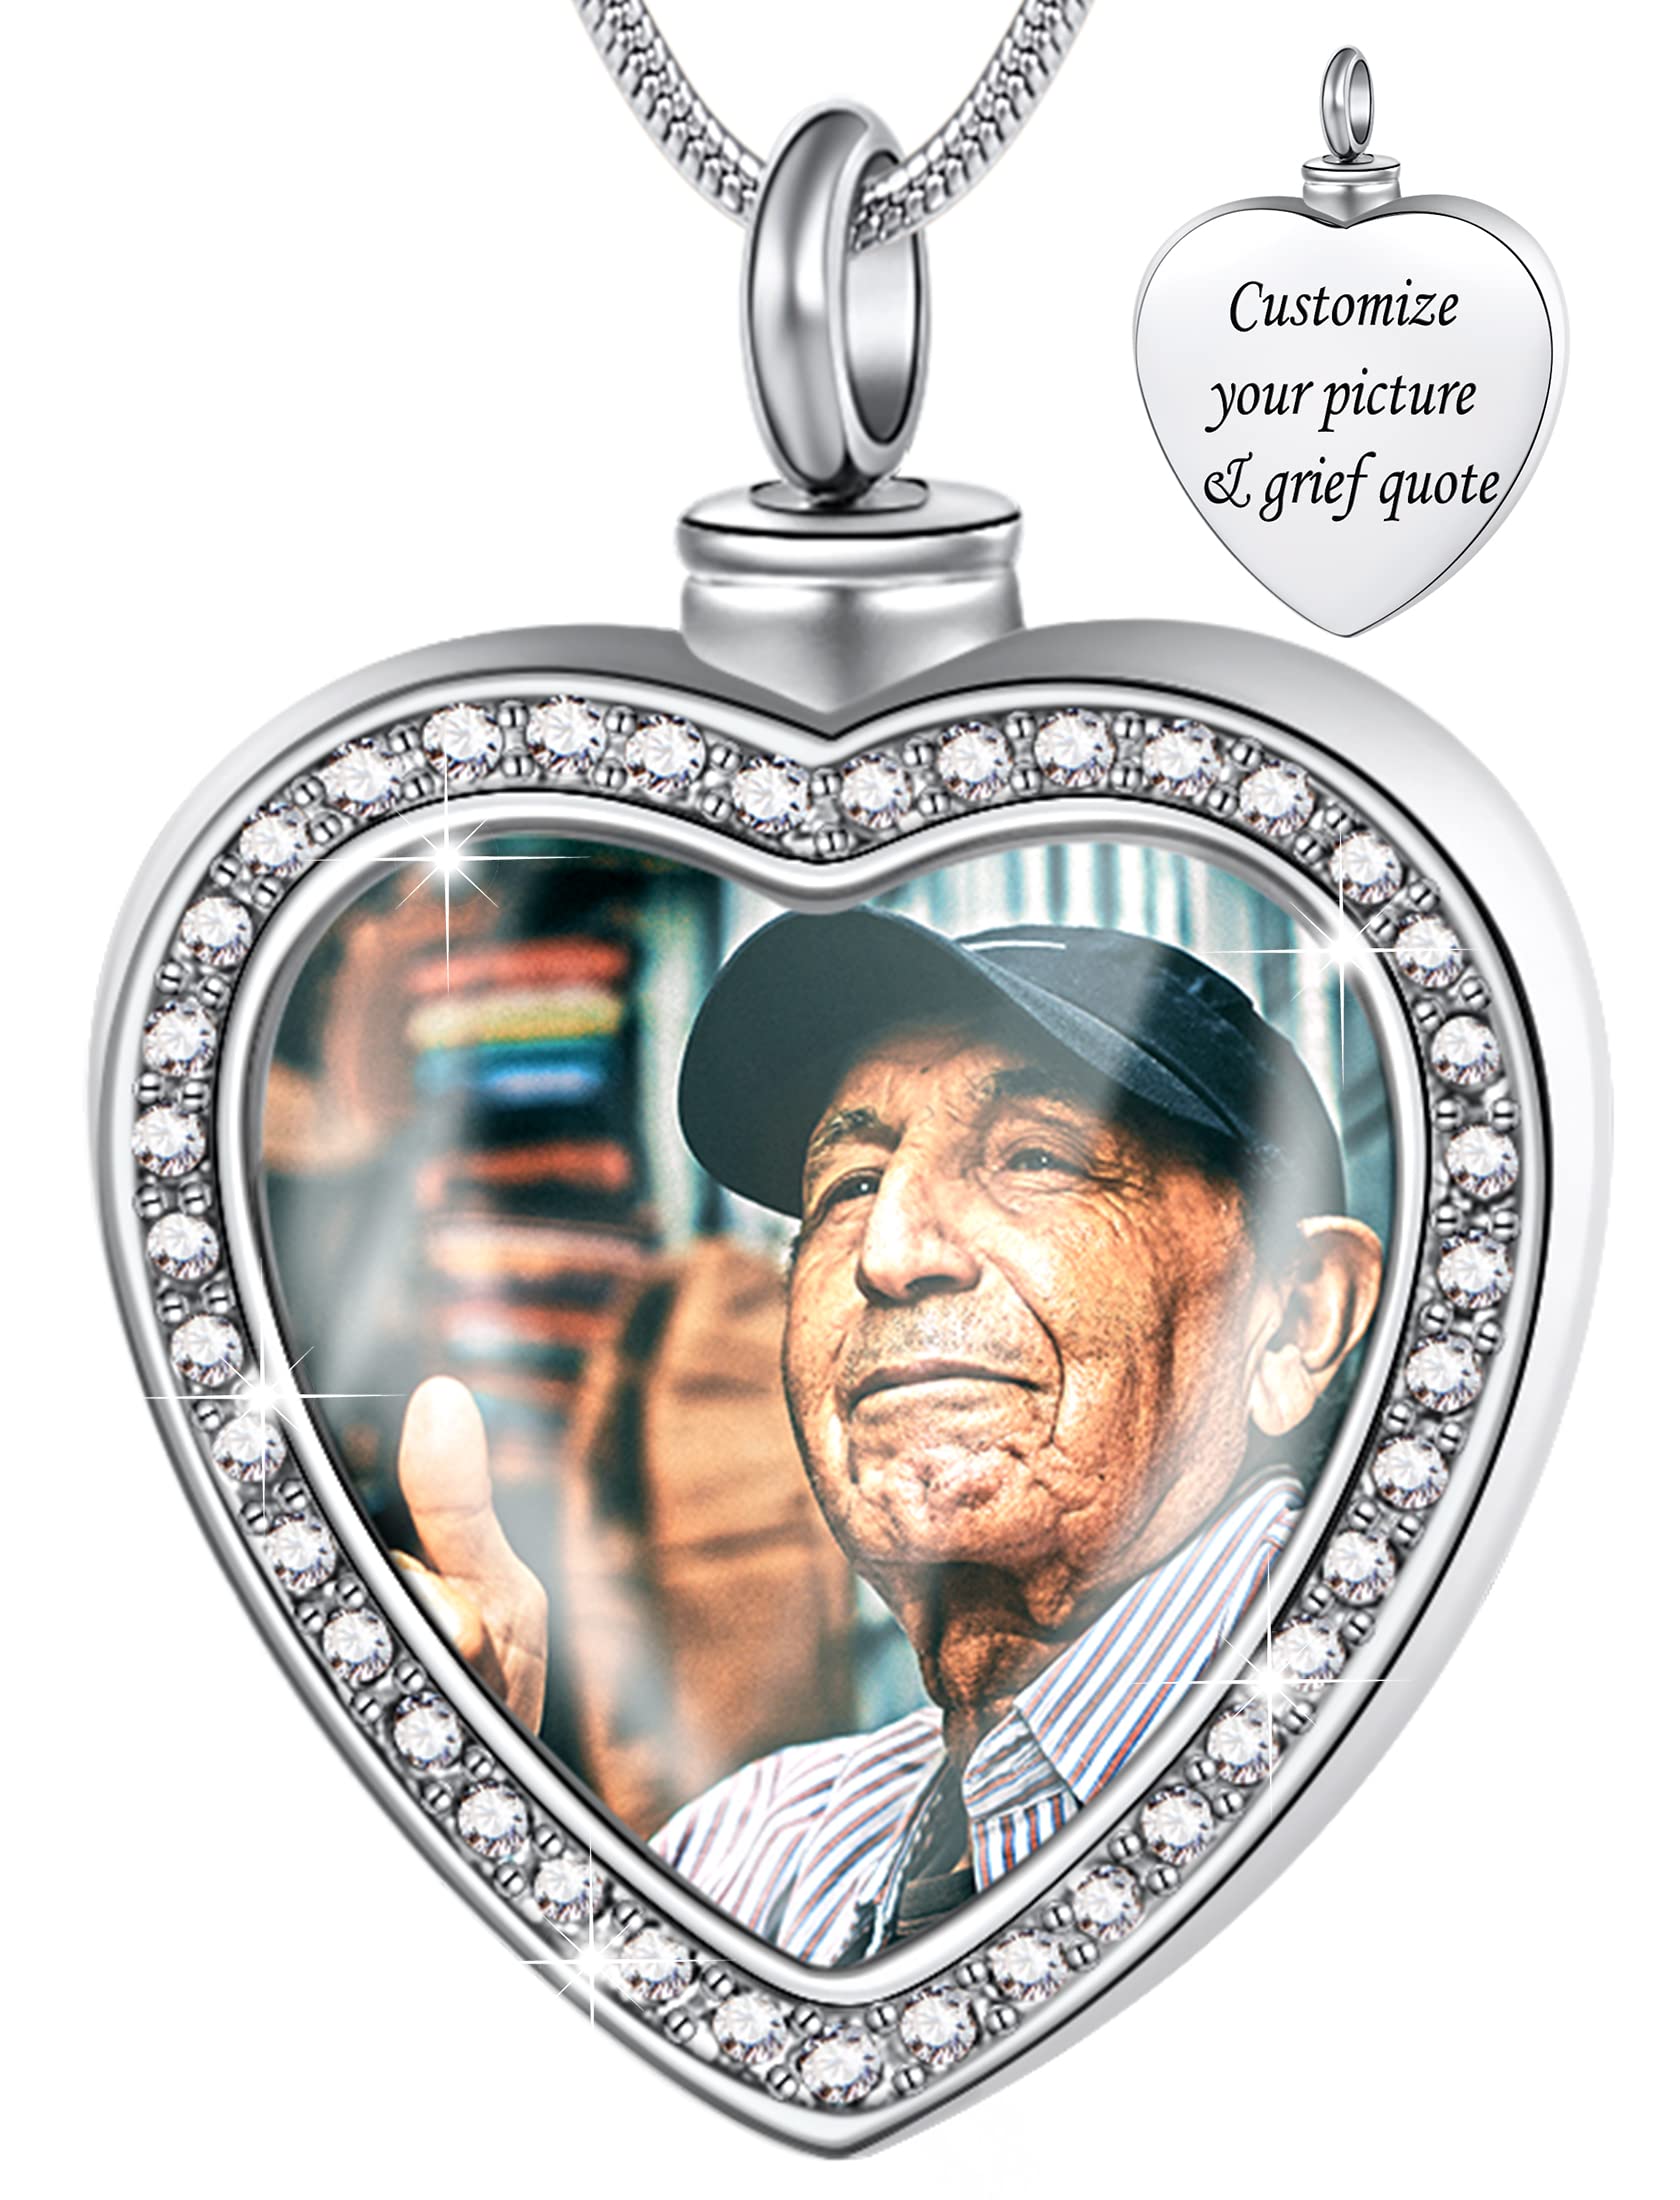 Fanery sue Customized Photo Urn Necklace for Ashes, Personalized Ashes Necklace with Picture Inside, Cremation Jewelry Ashes Keepsake Necklace for Women & Men